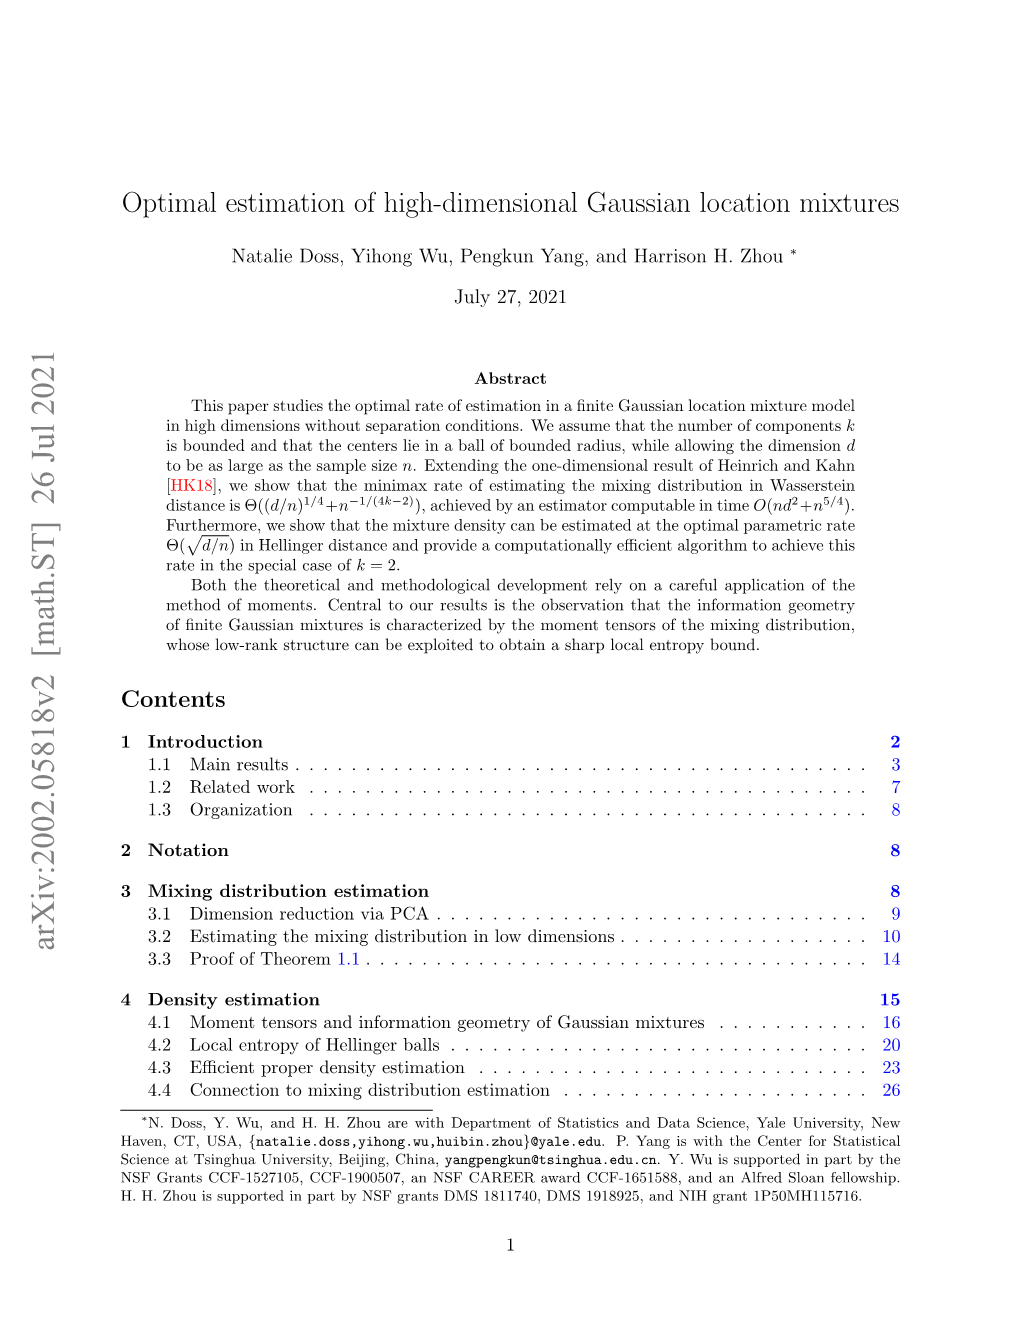 Optimal Estimation of High-Dimensional Gaussian Location Mixtures